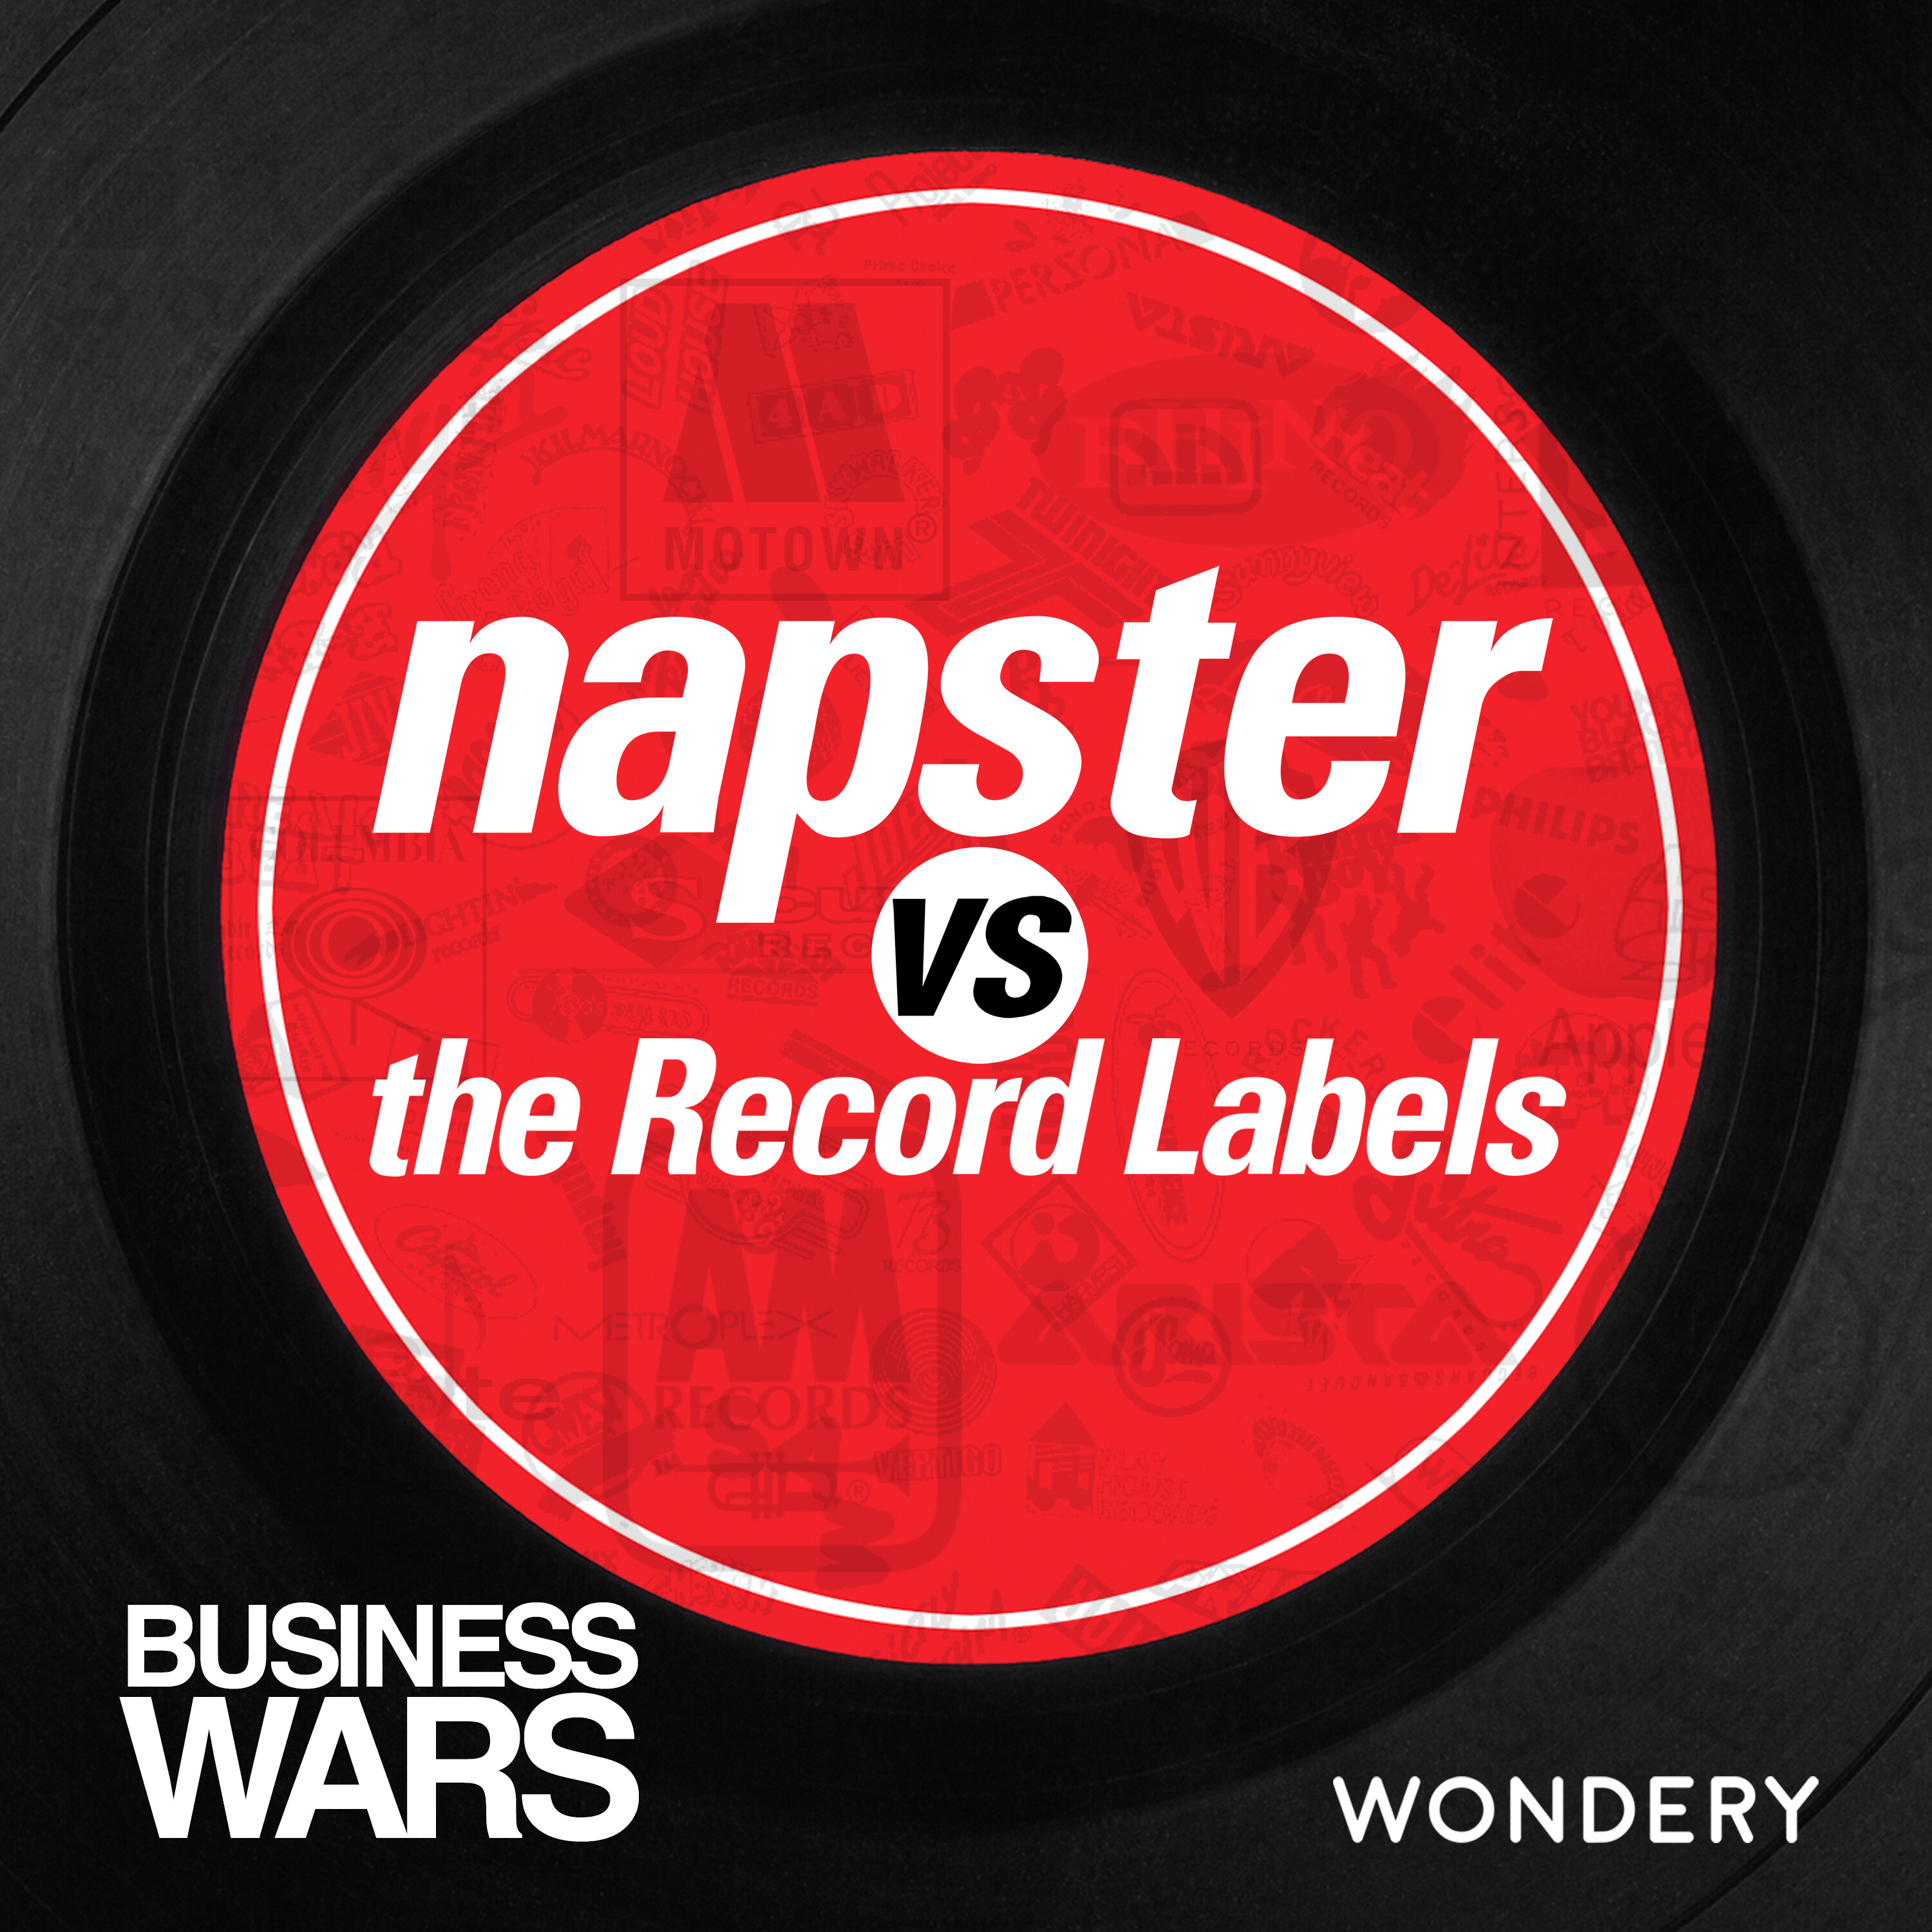 Napster vs The Record Labels - A Fatal Email  | 5